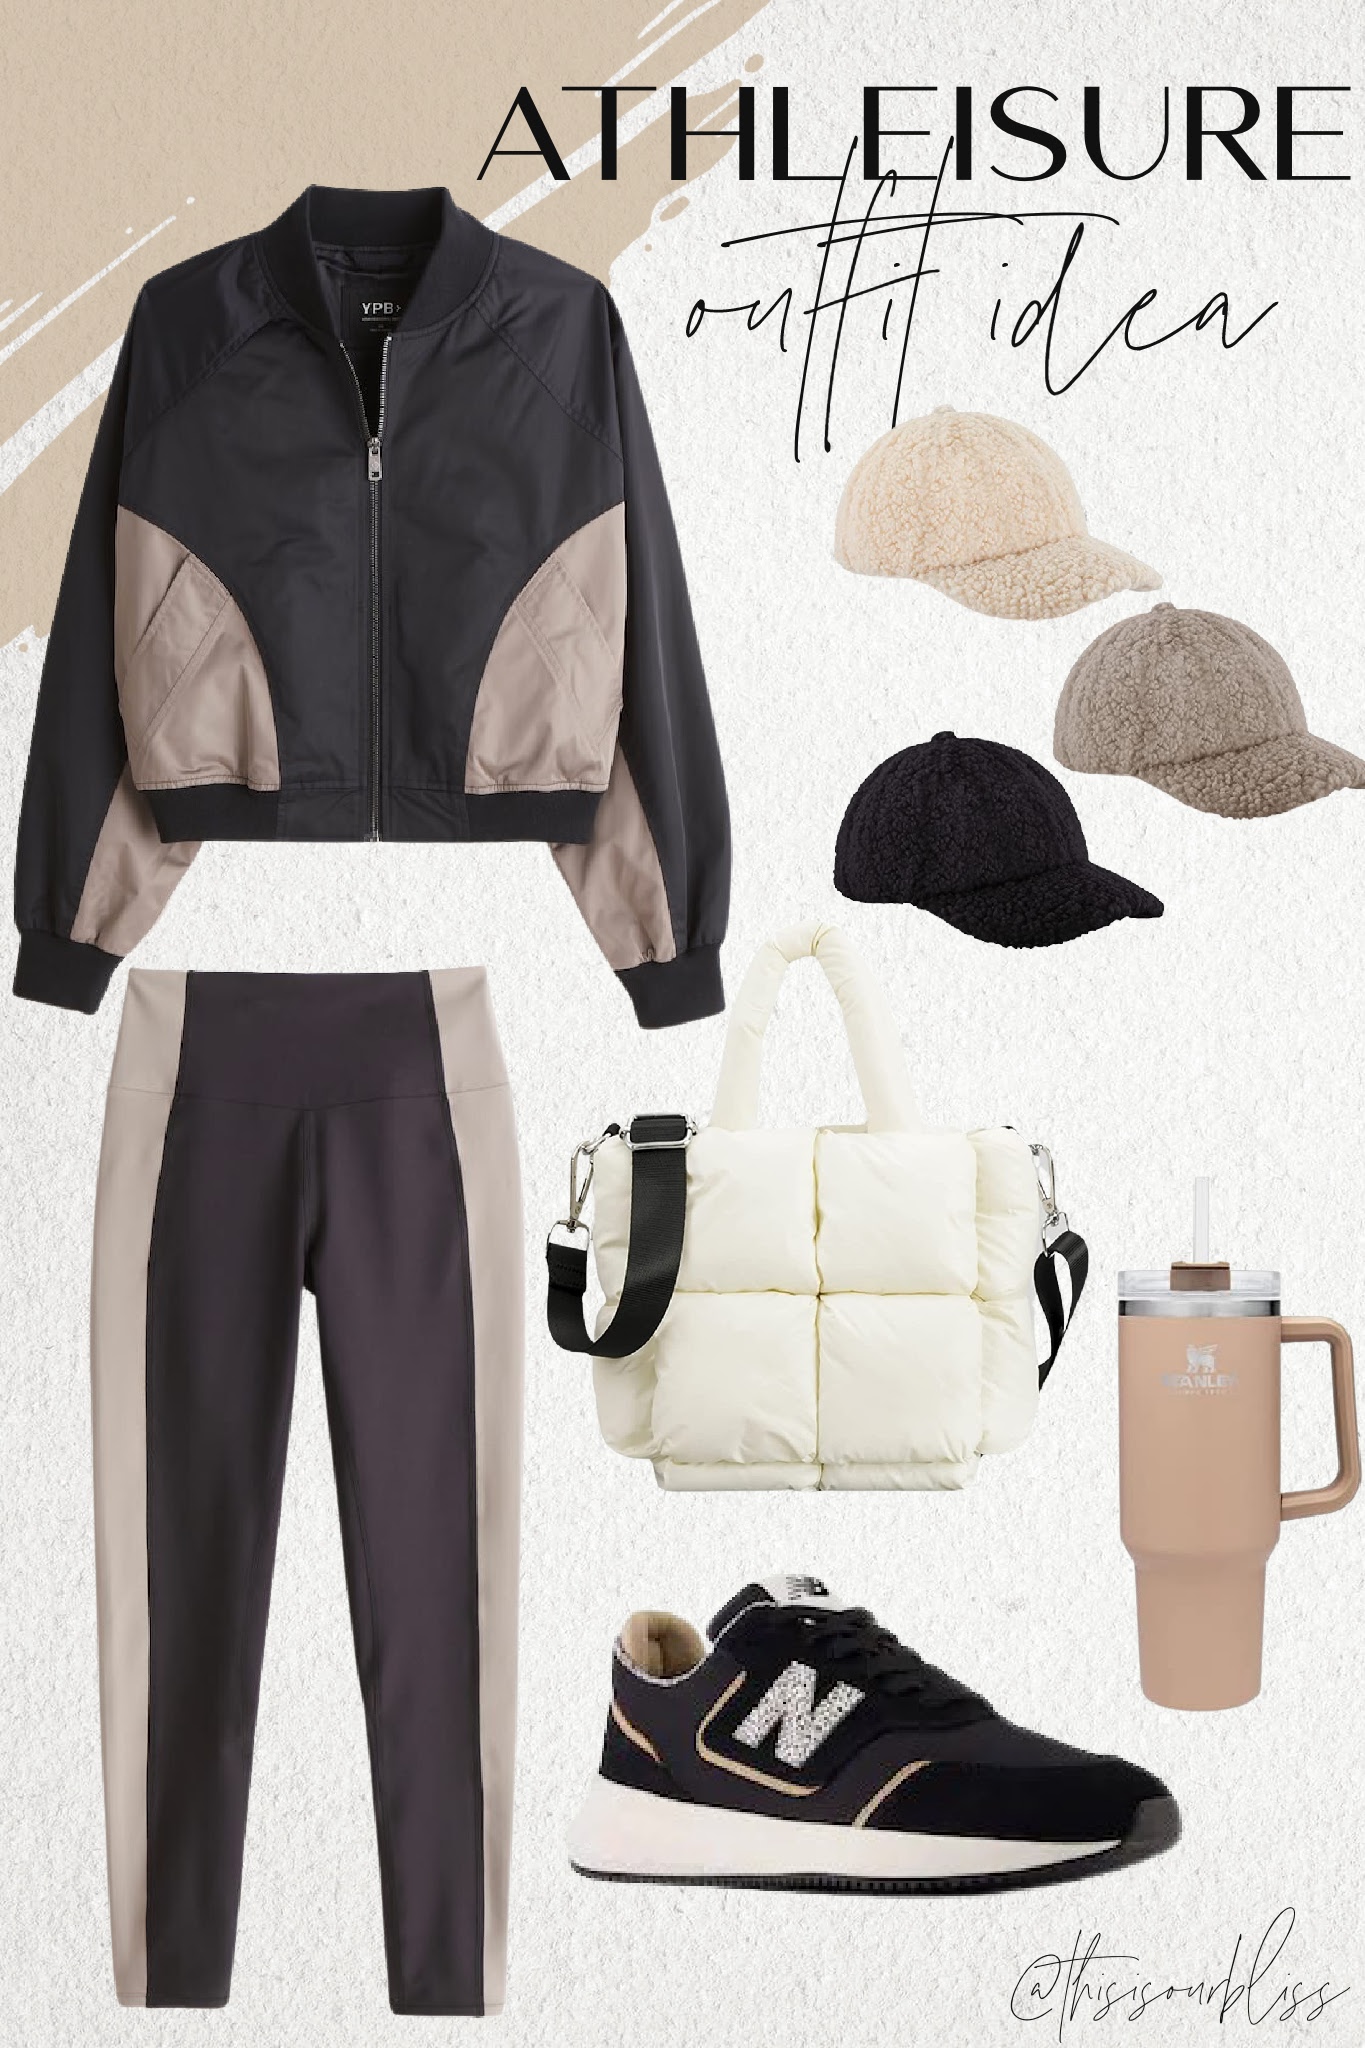 Abercrombine Activewear - athleisure outfit idea - cropped bomber jacket leggings with quilted puffer tote bag stanley cup and sherpa hat - This is our Bliss